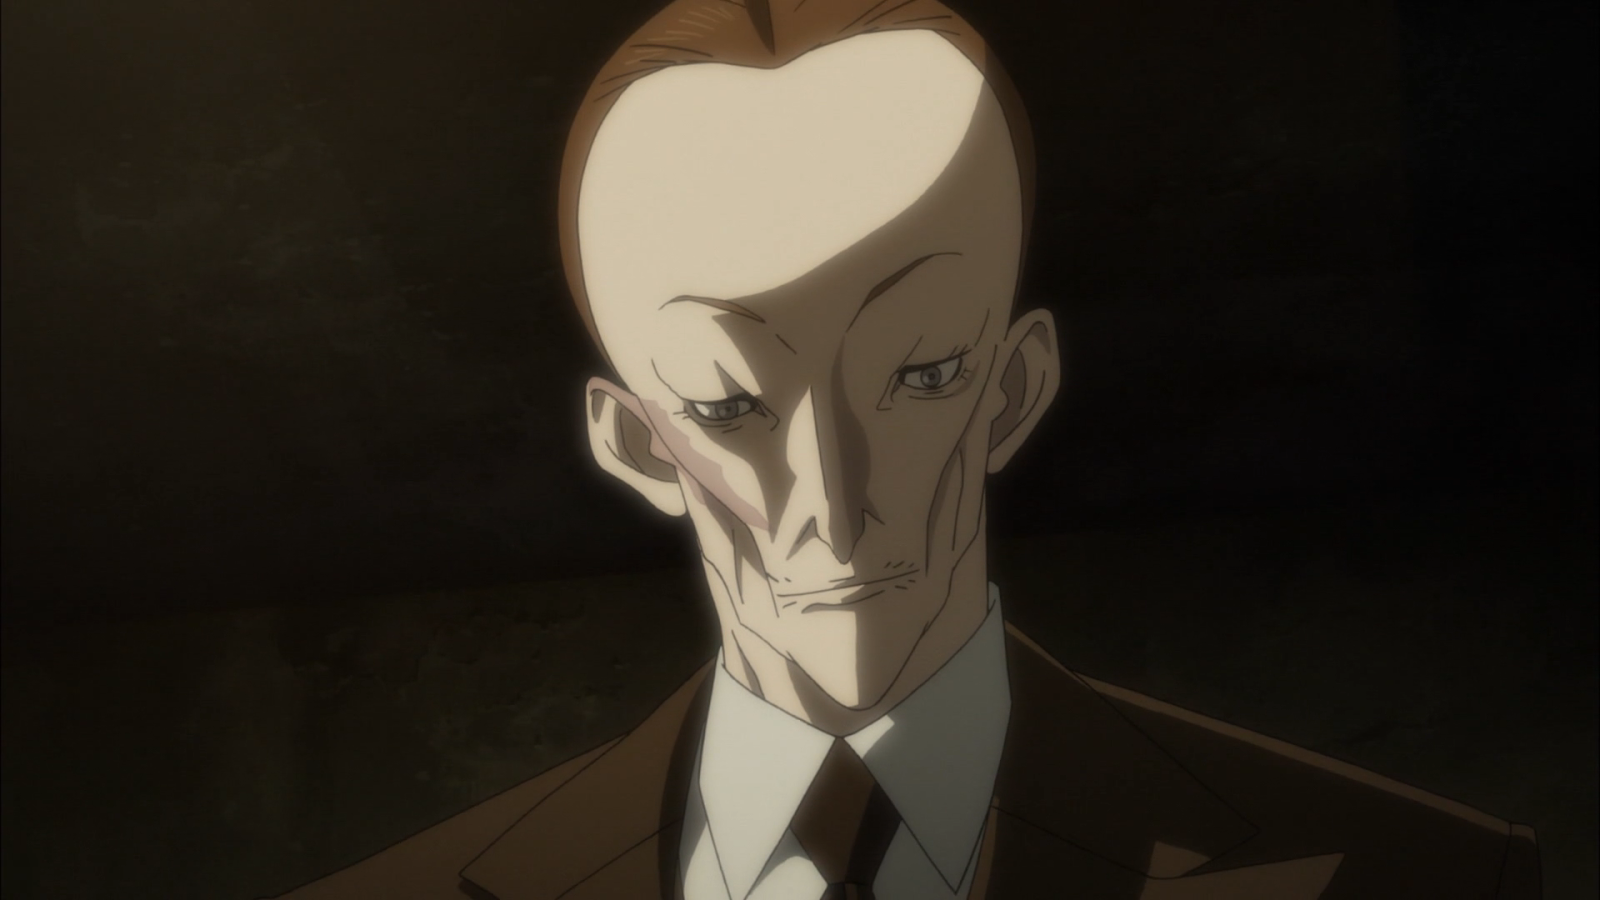 Crunchyroll - The 14 Most Fabulous Foreheads in Anime